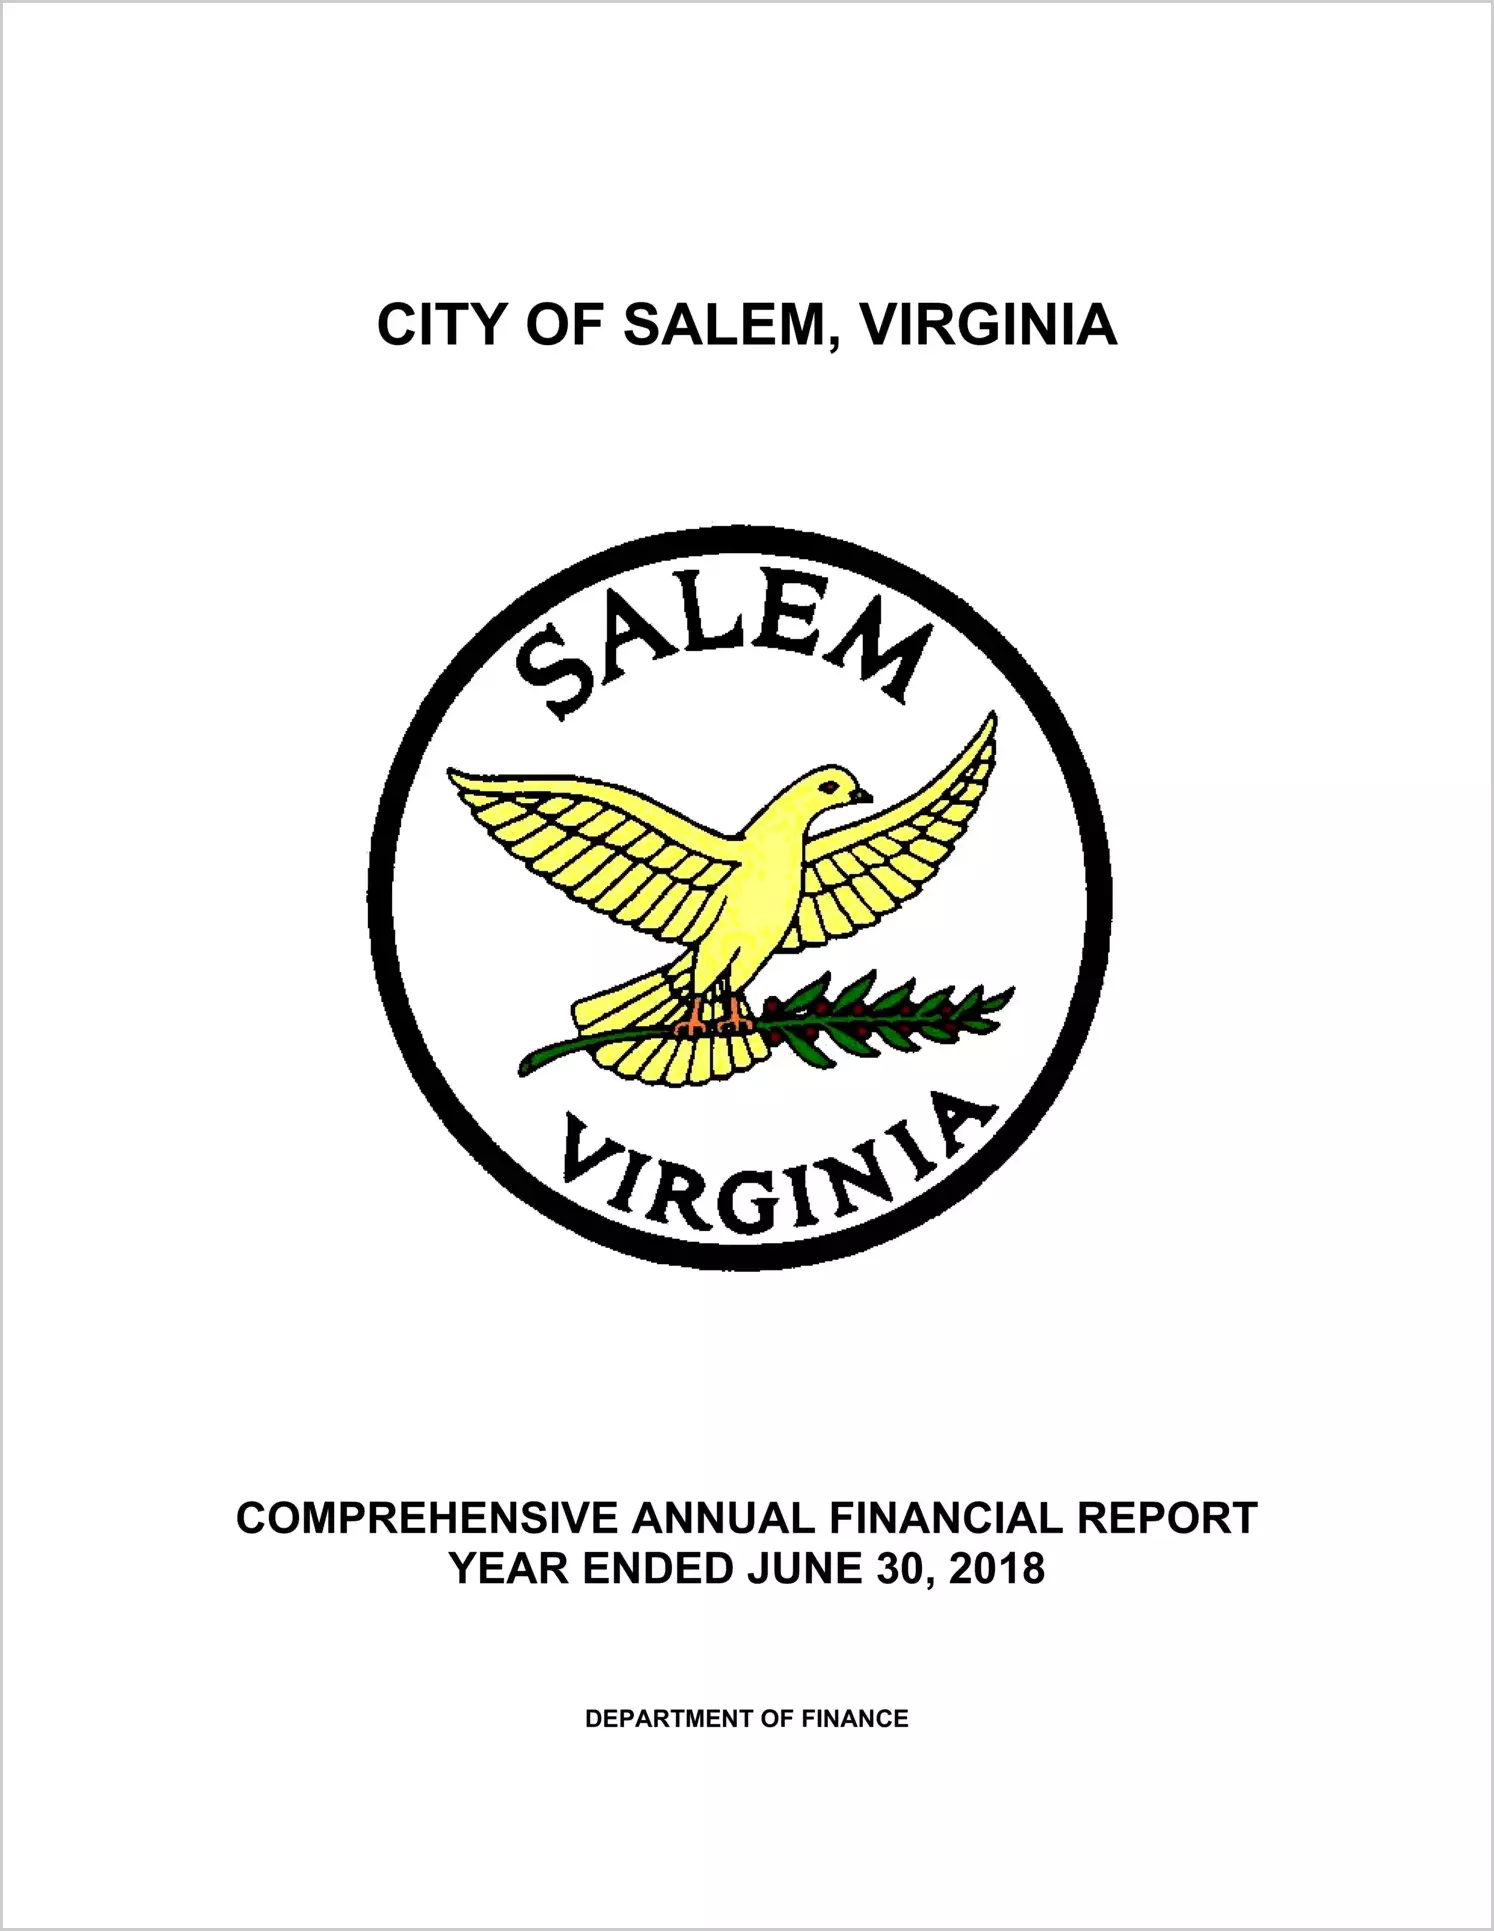 2018 Annual Financial Report for City of Salem